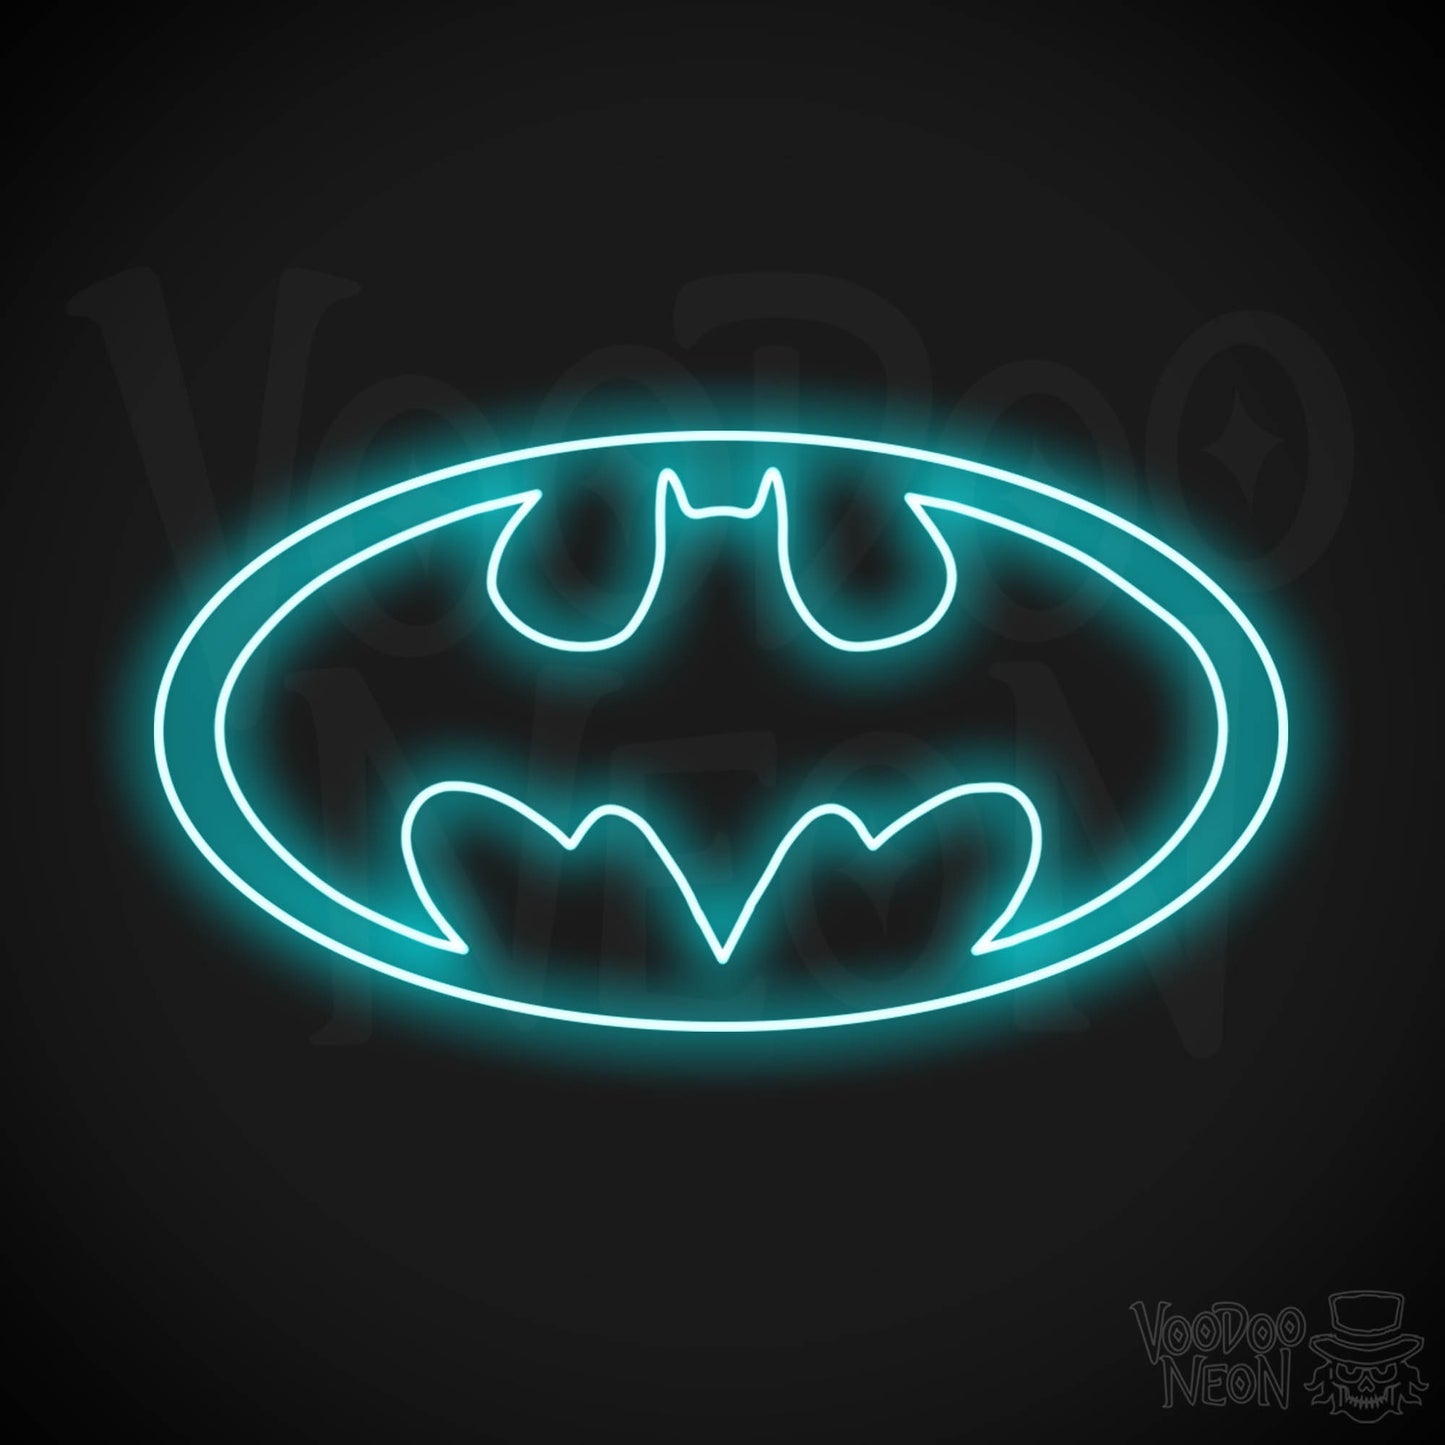 Batman Neon Sign - Batman Sign - Batman Light - Batman Symbol Wall Art - LED Sign - Color Ice Blue